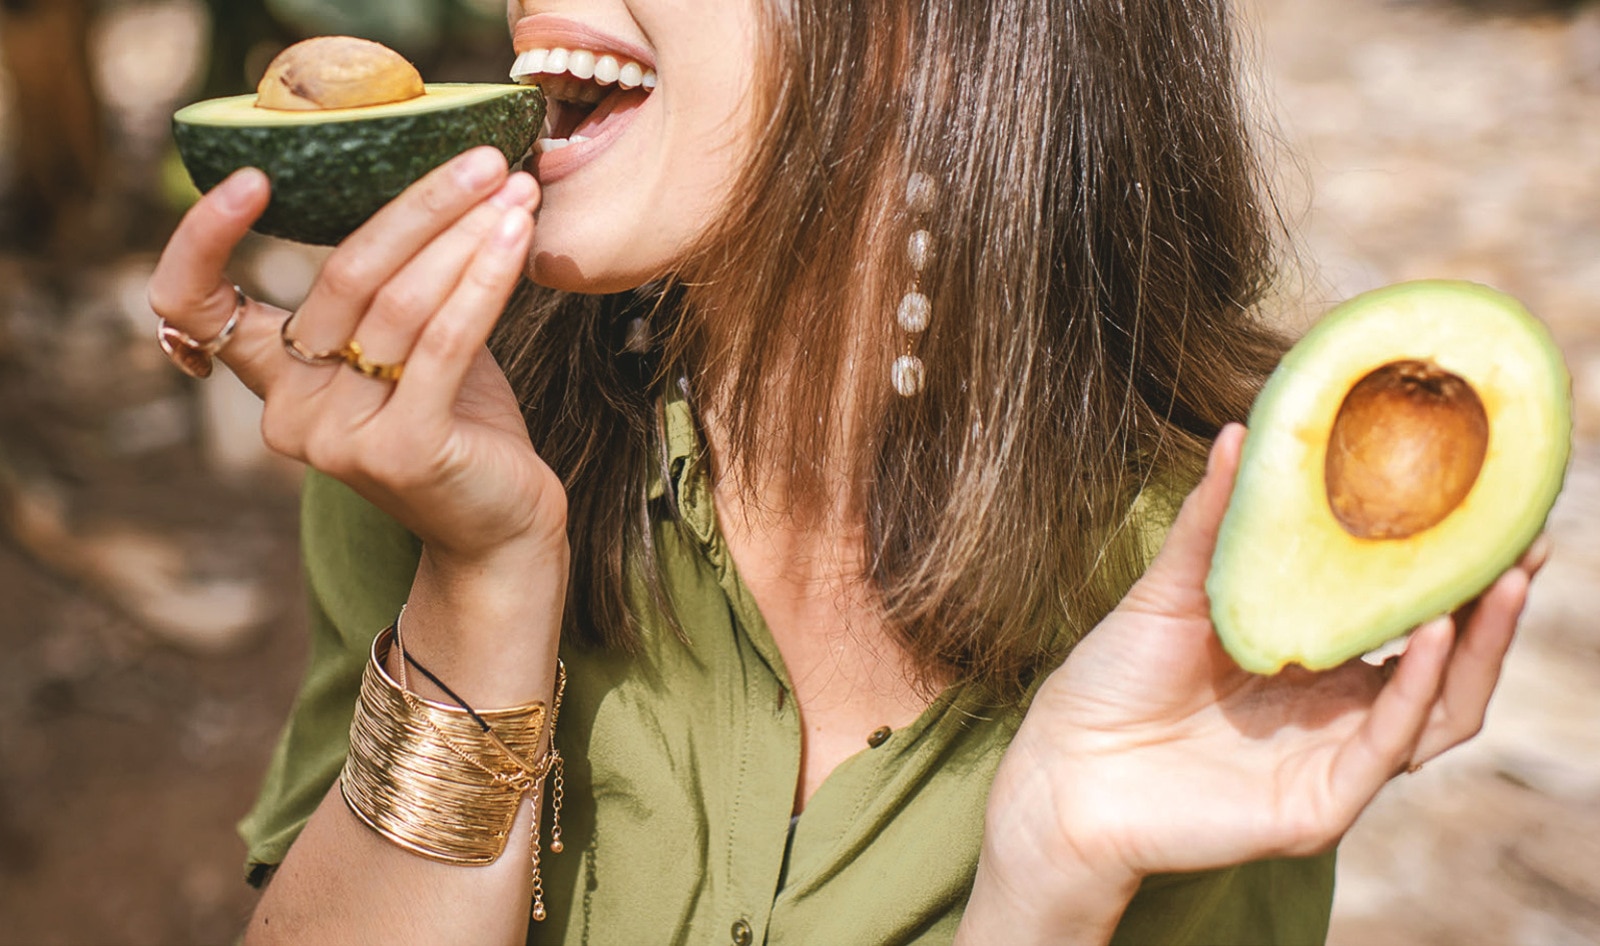 The Biggest Benefits of Eating Avocado, From Good Skin to Lower Cholesterol (Plus Recipes!)&nbsp;